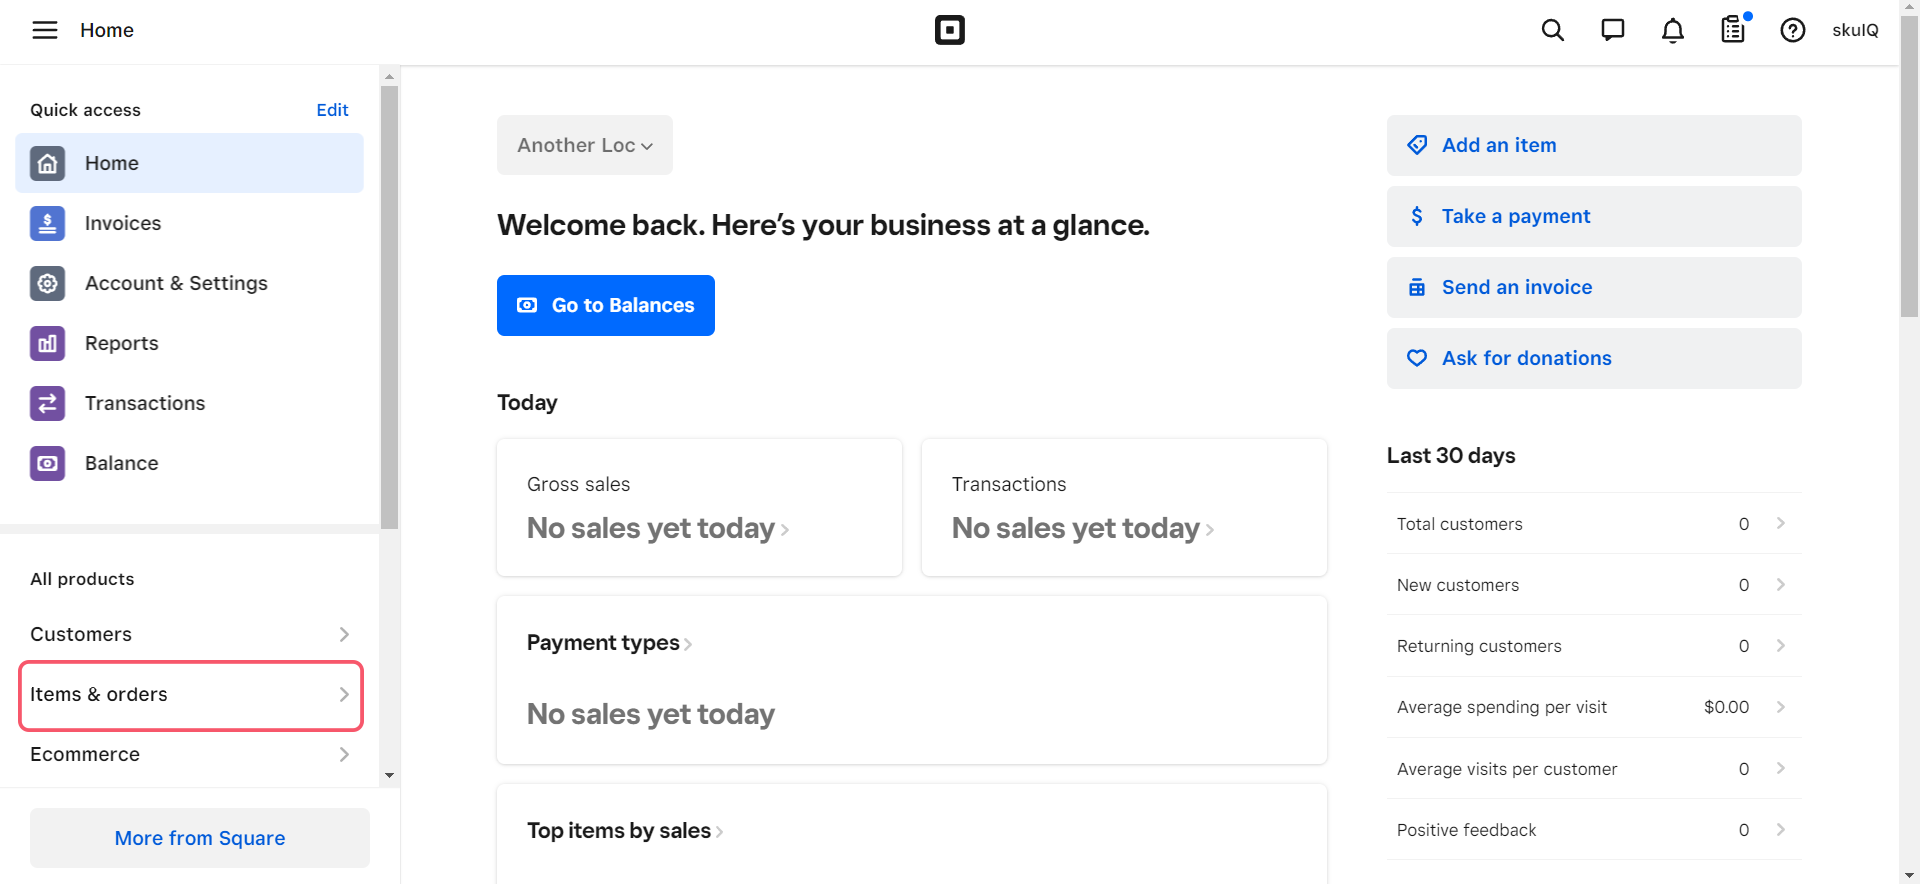 square dashboard with Items & orders highlighted